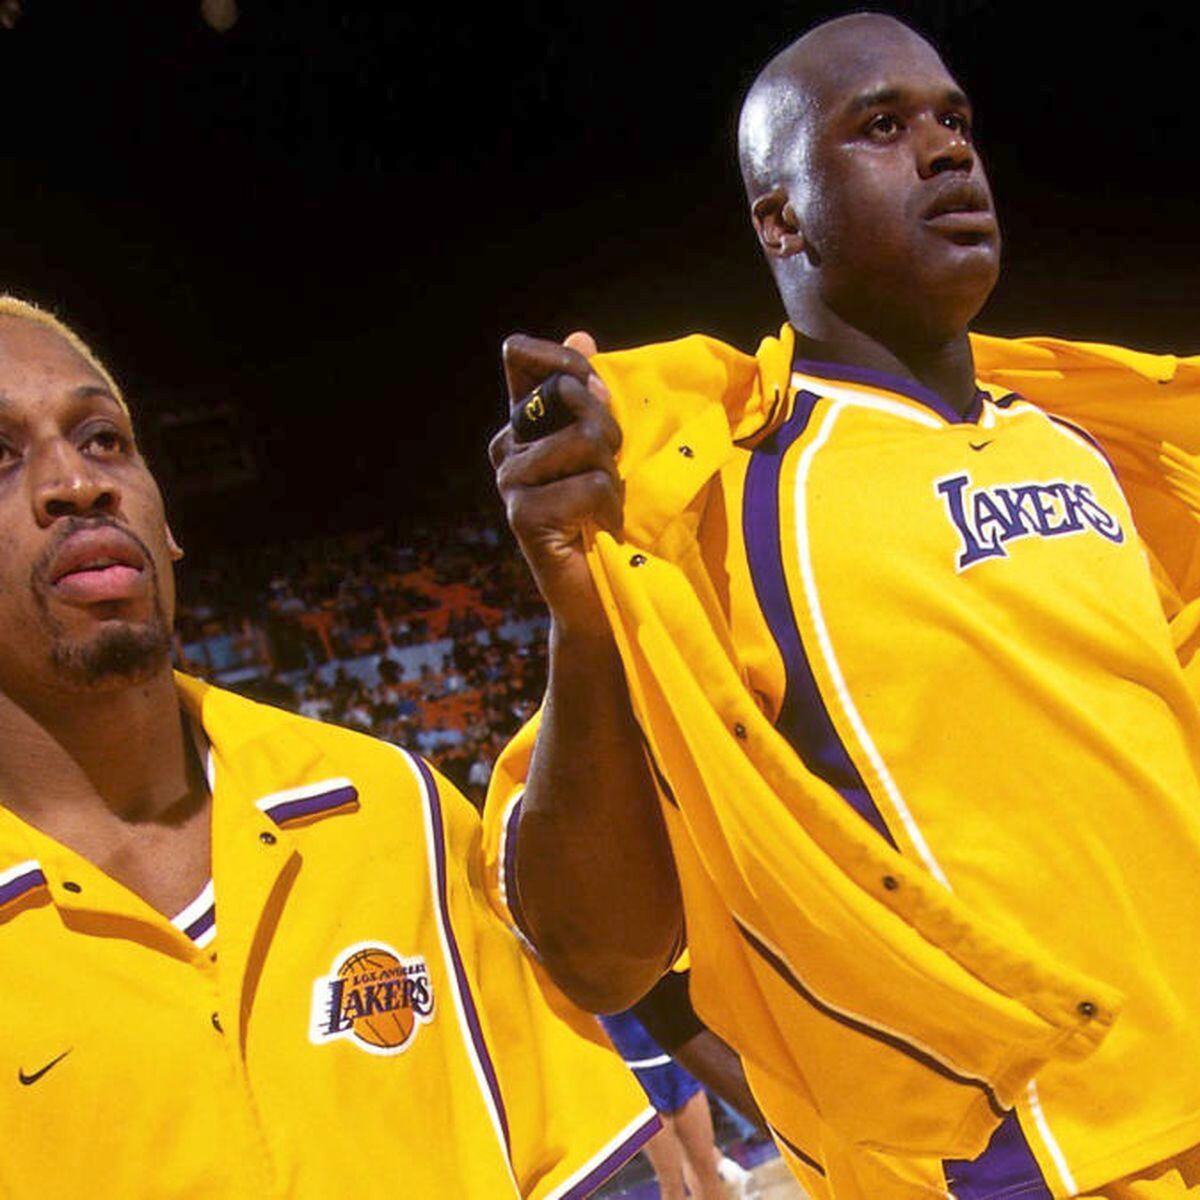 Did you know that Dennis Rodman once played for the LA Lakers? We